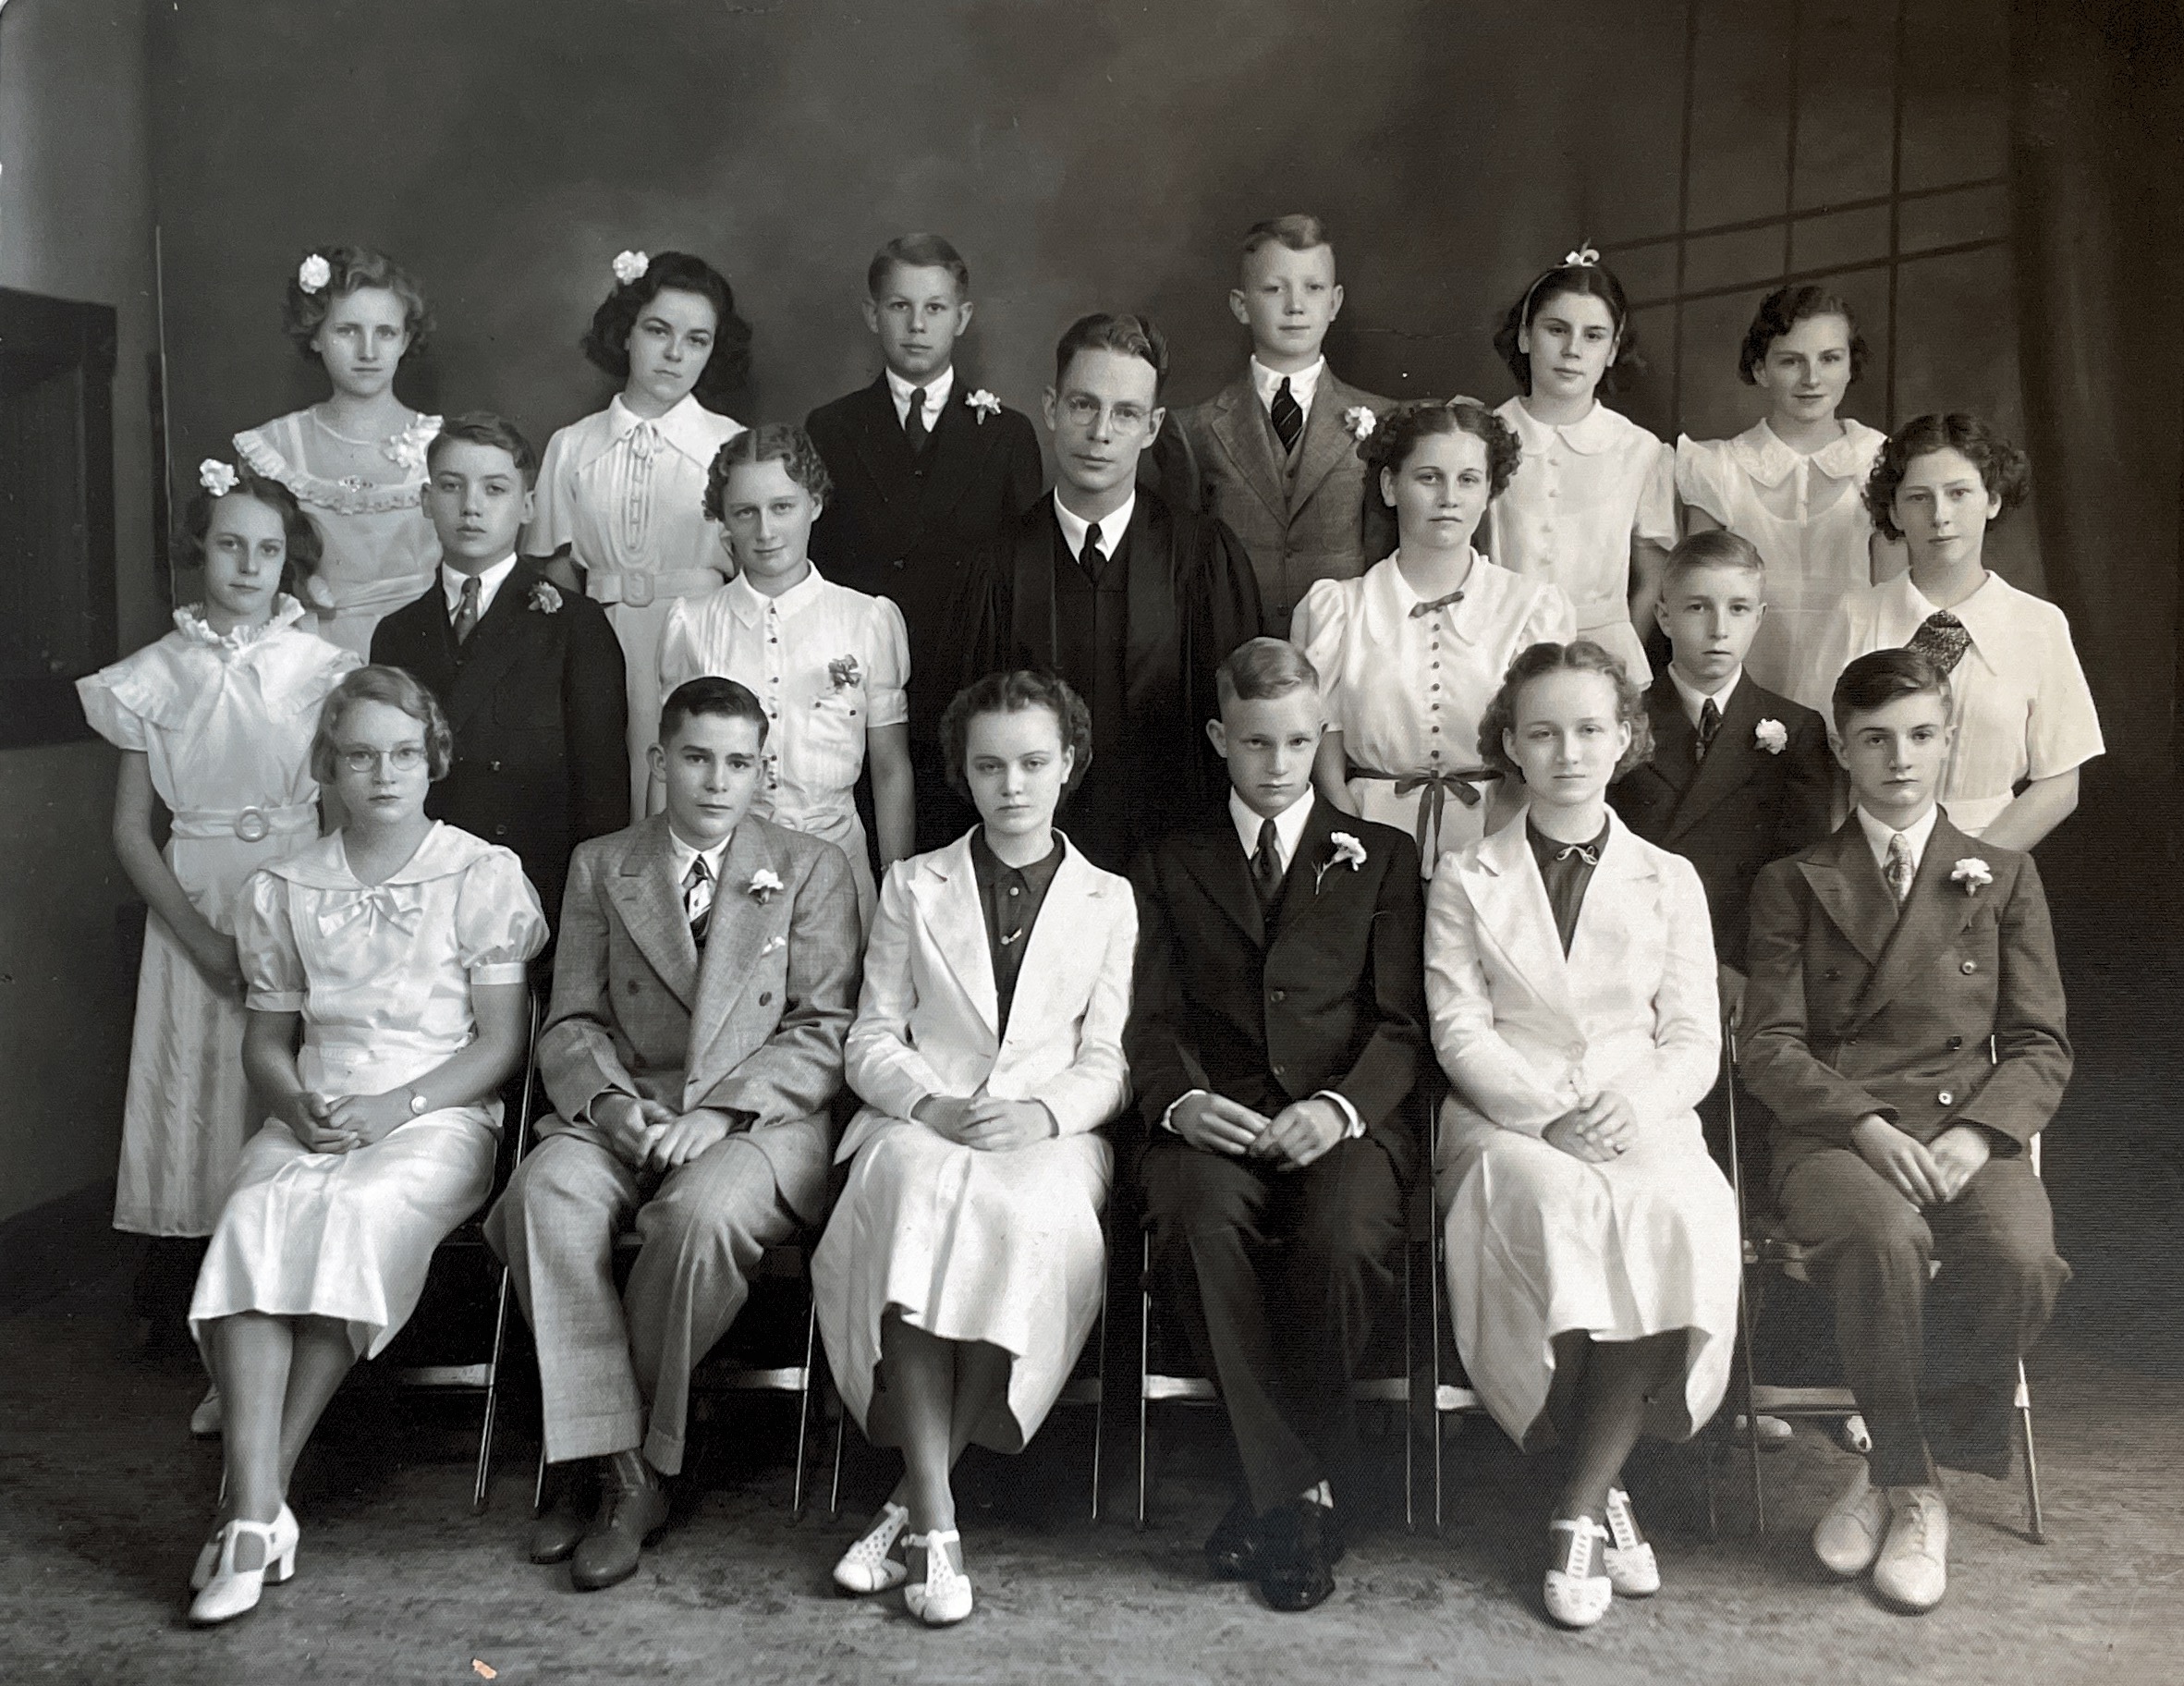 Confirmation class - 1937 ... 
Glenn - back row, third from left
Bruce - middle row, second from left